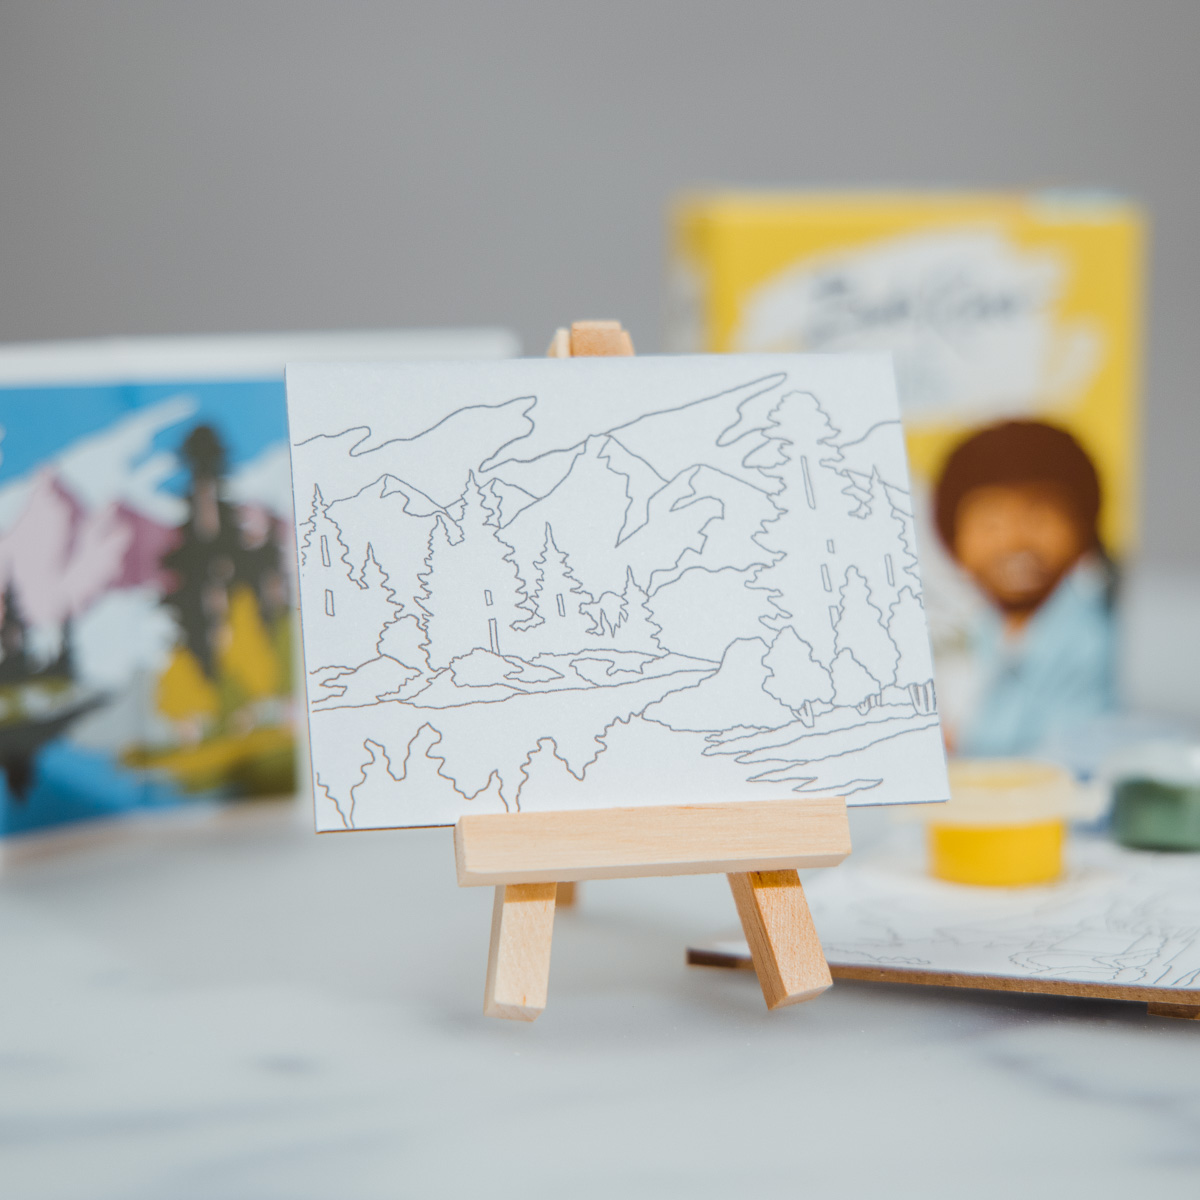 Bob Ross By The Numbers Mini Kit